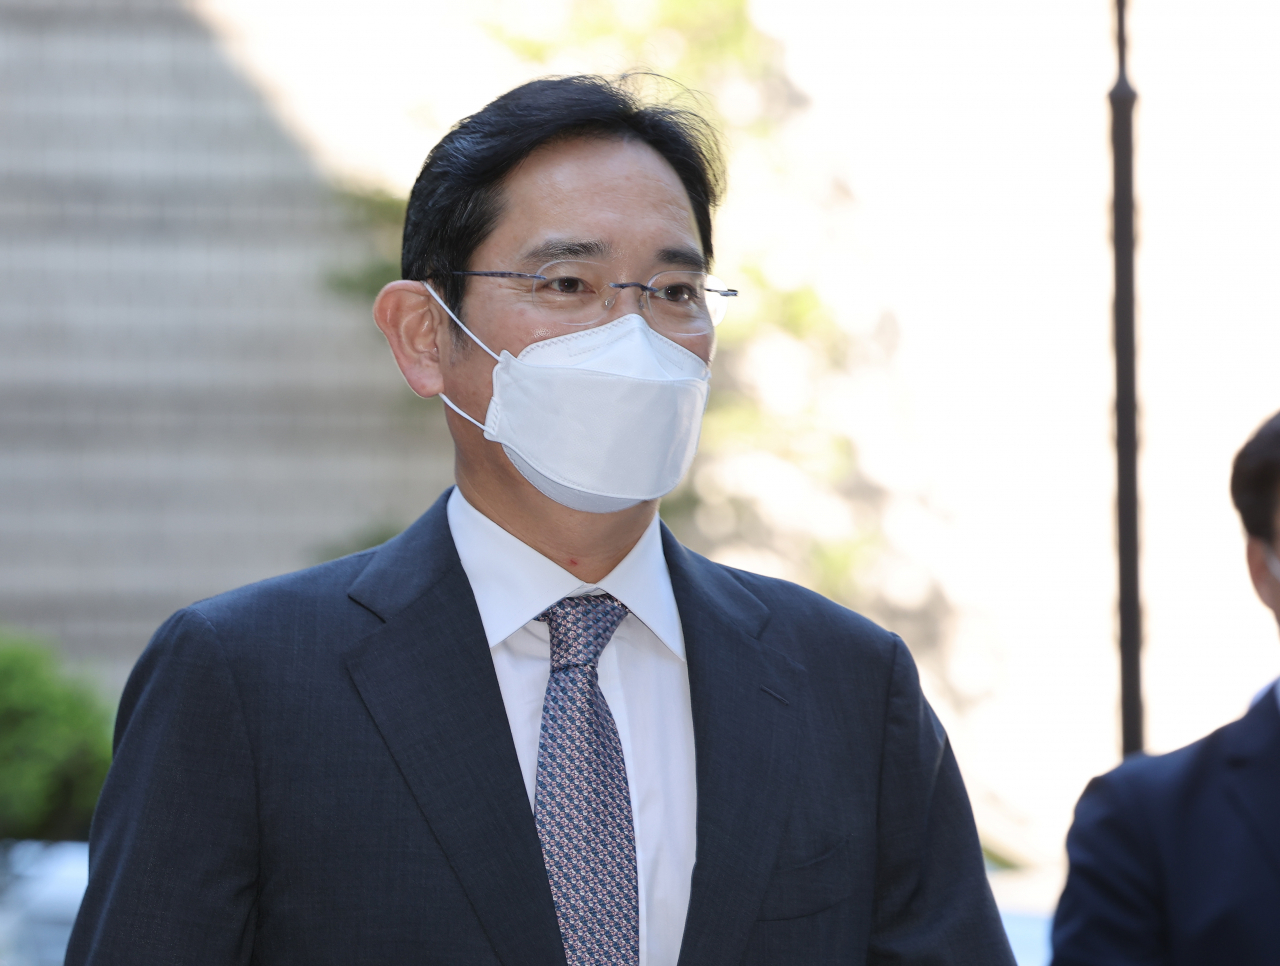 Samsung Electronics Vice Chairman Lee Jae-yong is seen attending a court trial at the Seoul Central District Court over an alleged involvement in a controversial merger of key Samsung affiliates on Friday. (Yonhap)